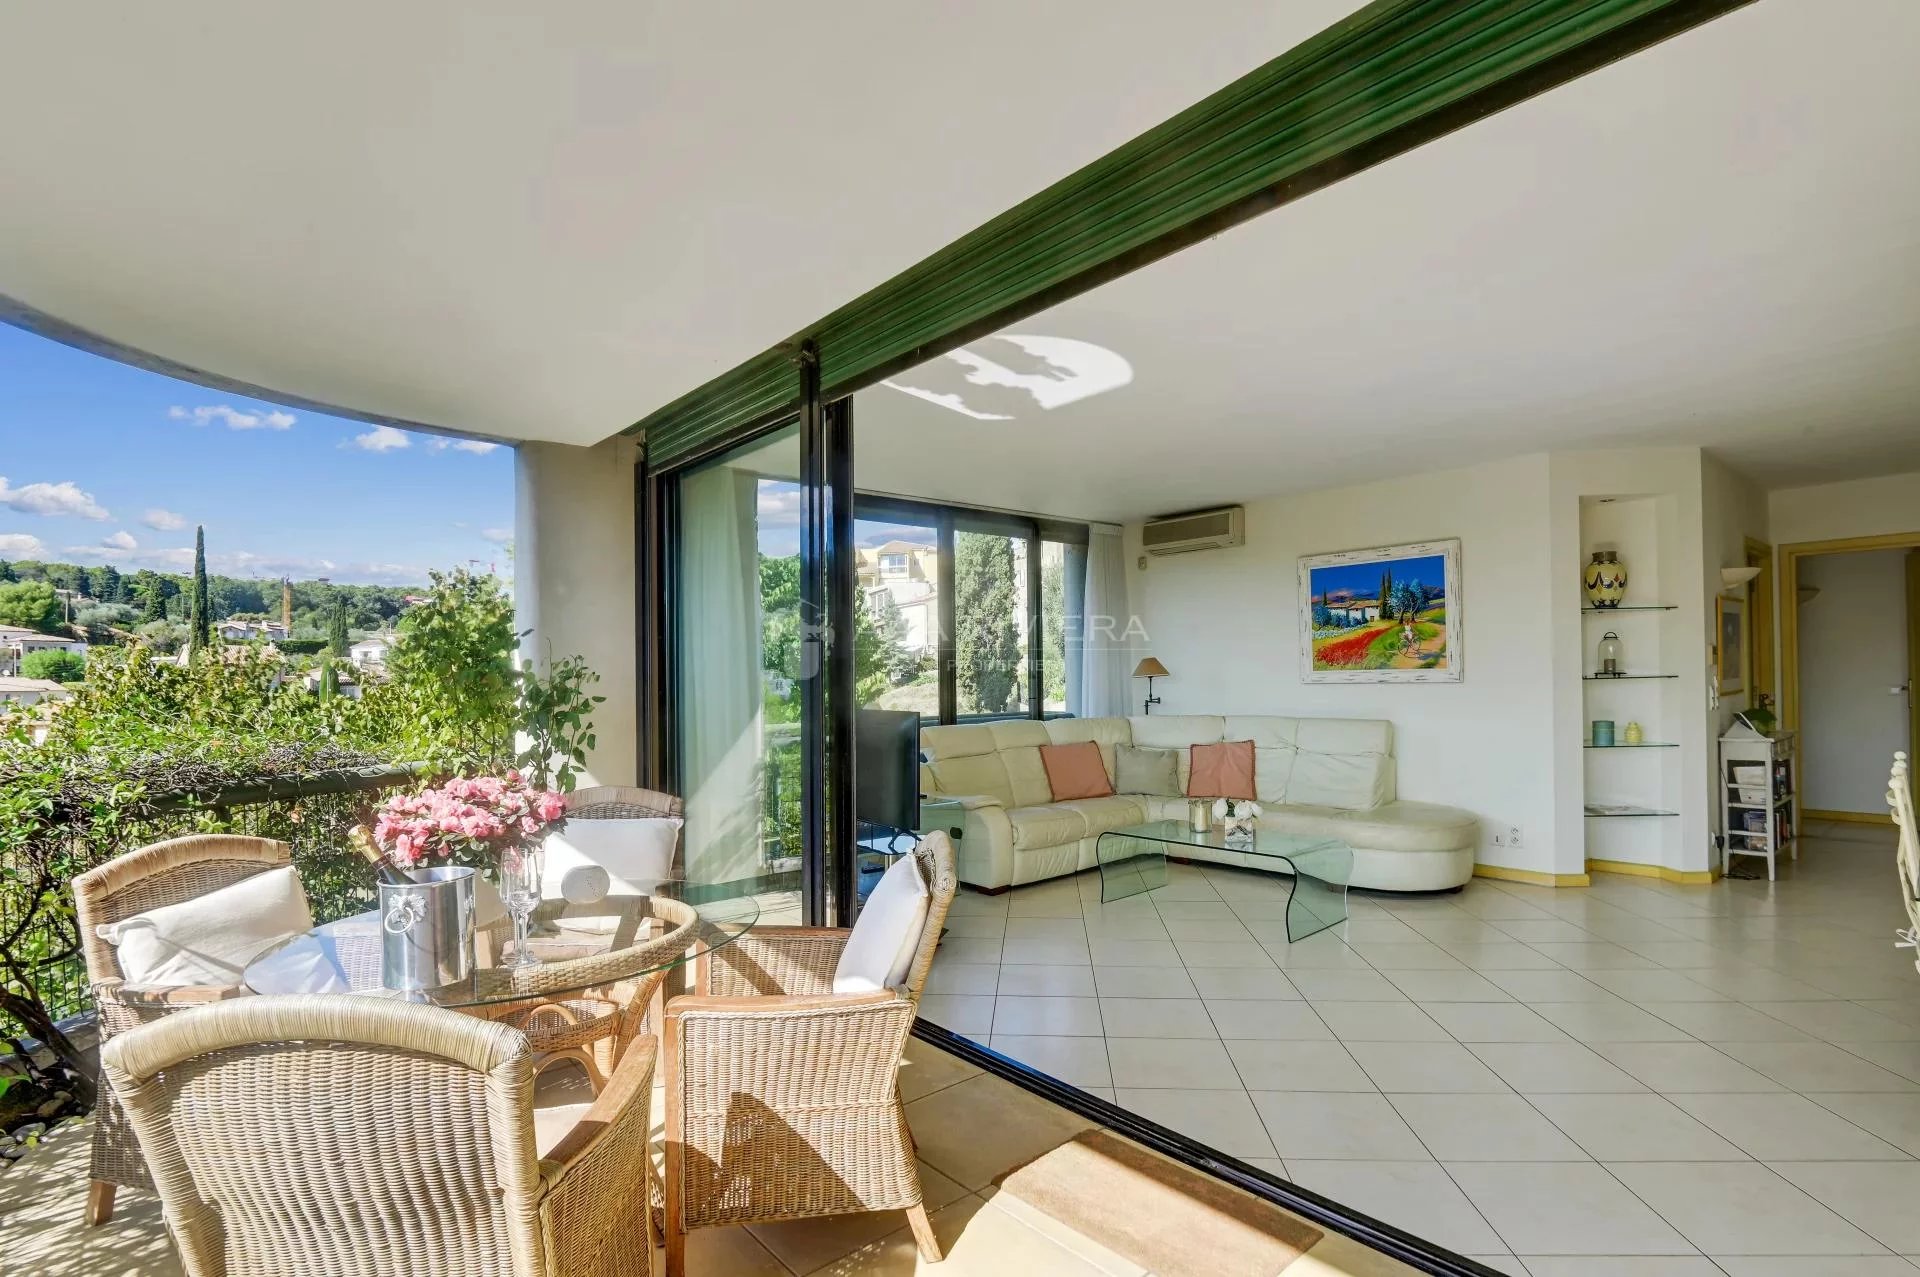 SOLD -  SOLE AGENT- Val de Mougins, 2-bedroom apt with large terrace, views and shops at your doorstep set in green surroundings